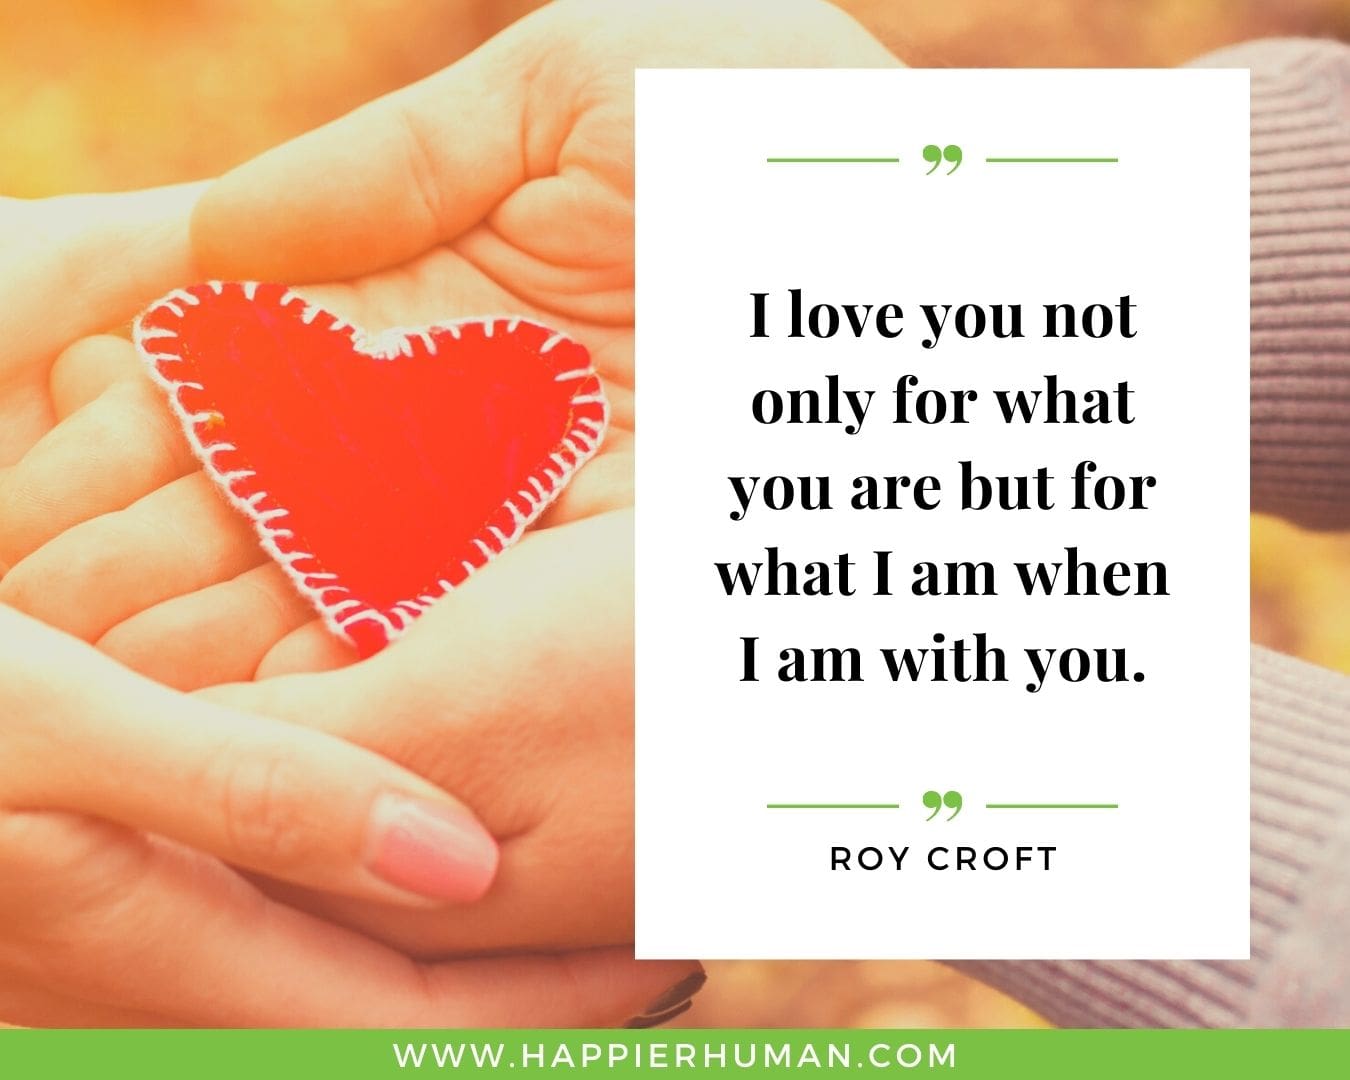 Sweet and Romantic Love Quotes for Her - “I love you not only for what you are but for what I am when I am with you.” – Roy Croft